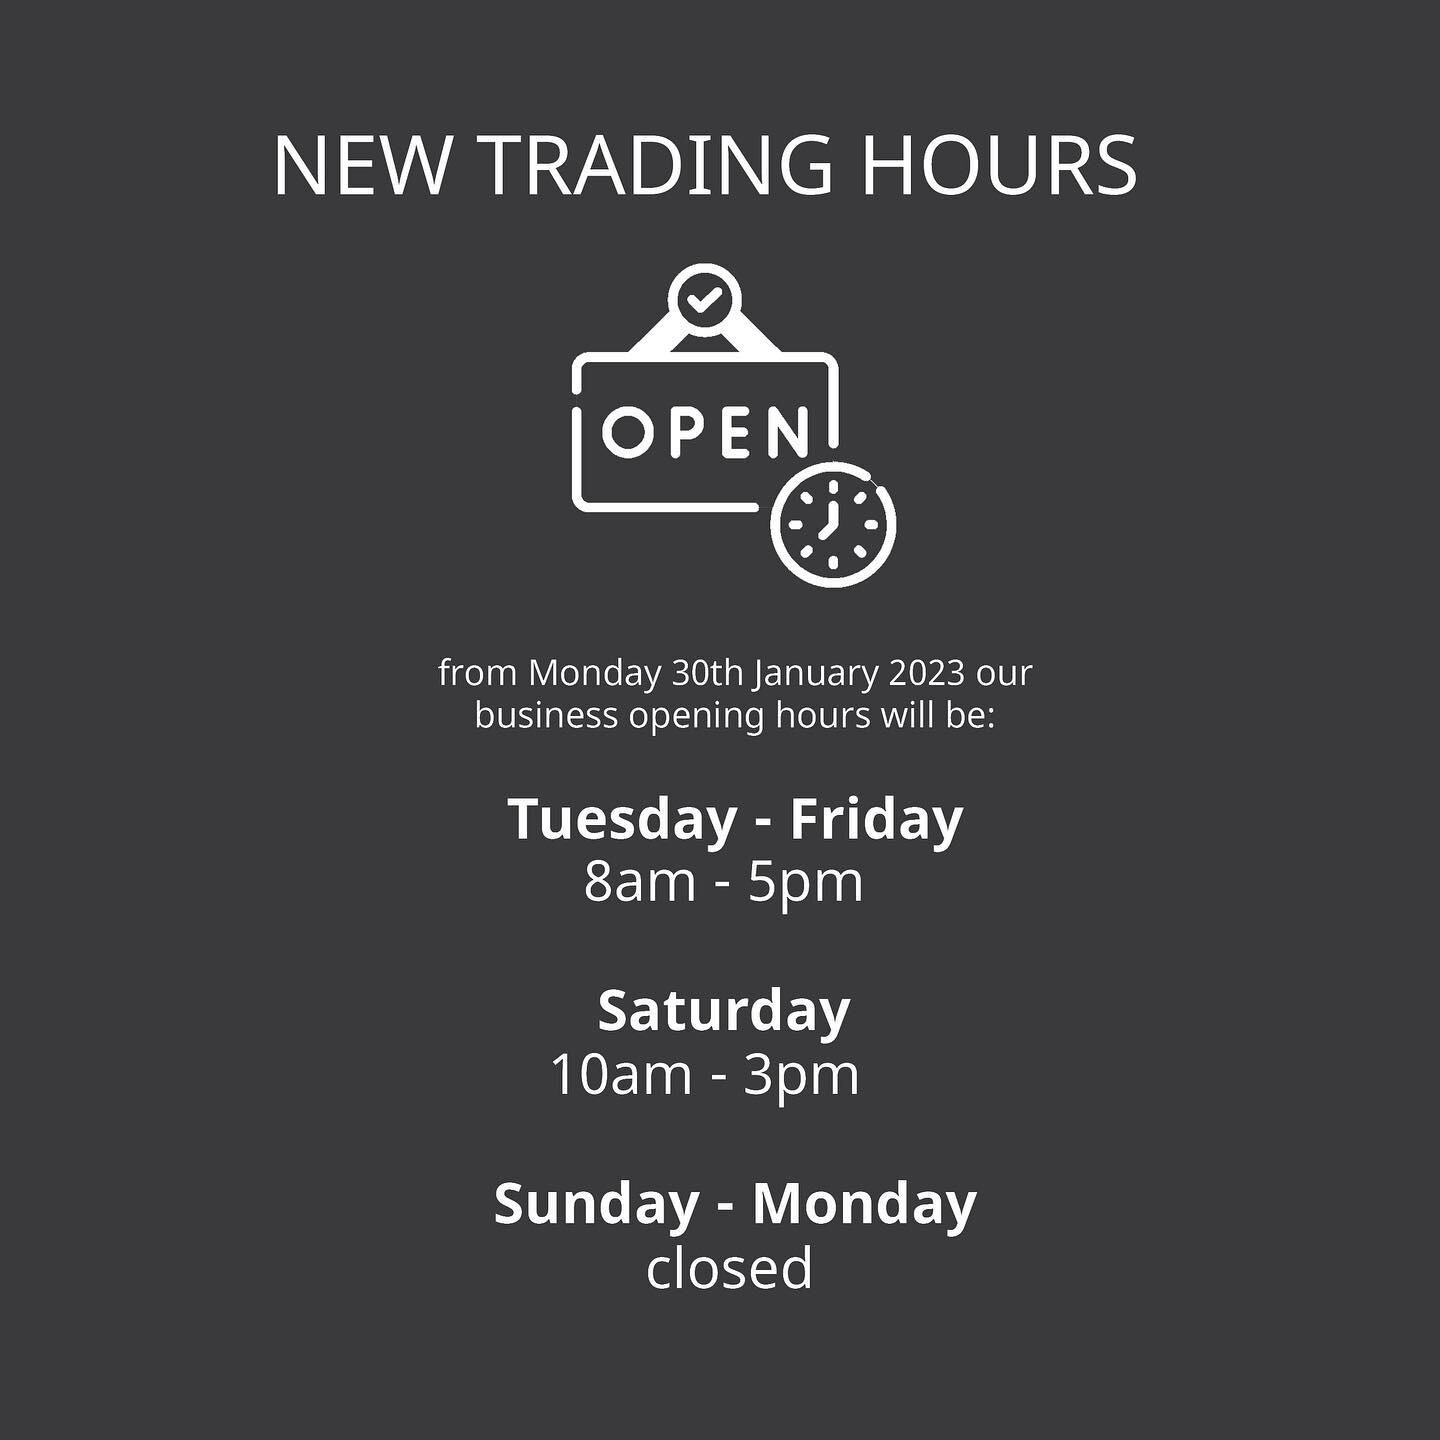 Dear customers 

We would like to inform you that we are changing our opening hours. 

Thank you for your continued support and hope to see you at the new time